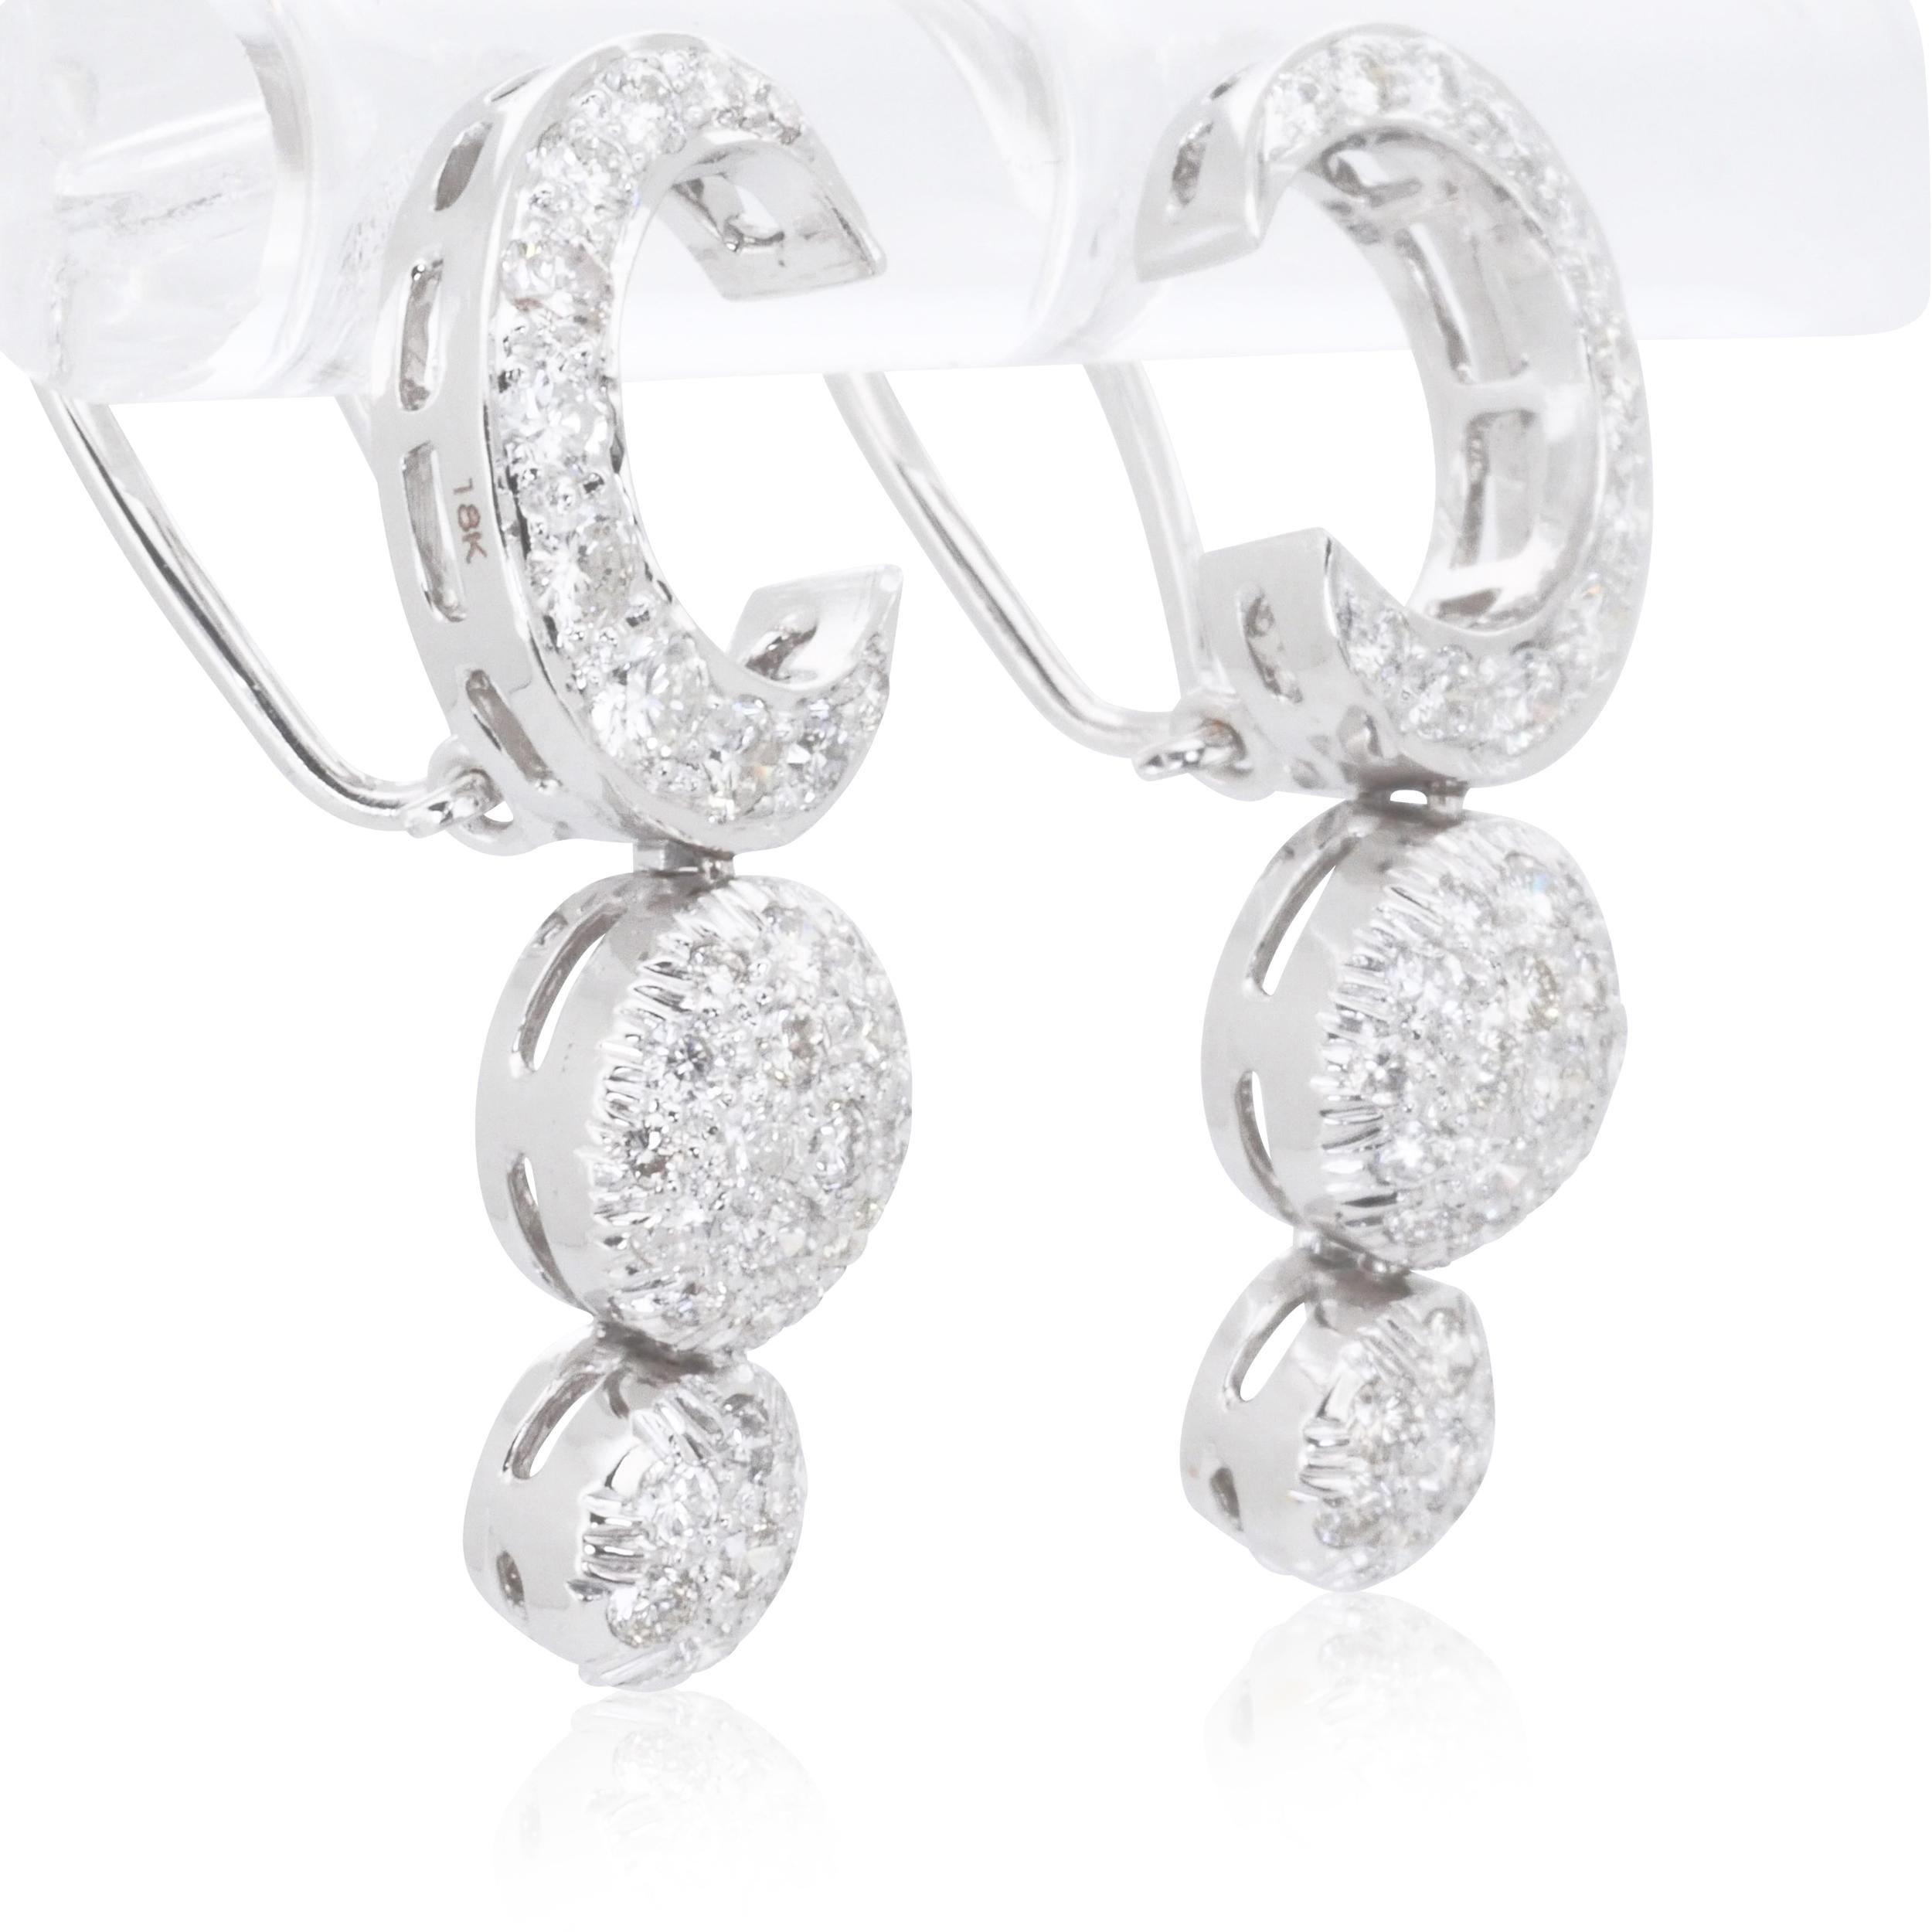 Round Cut Sparkling 18k White Gold Dangle Earrings with 2.4 carat Natural Diamond